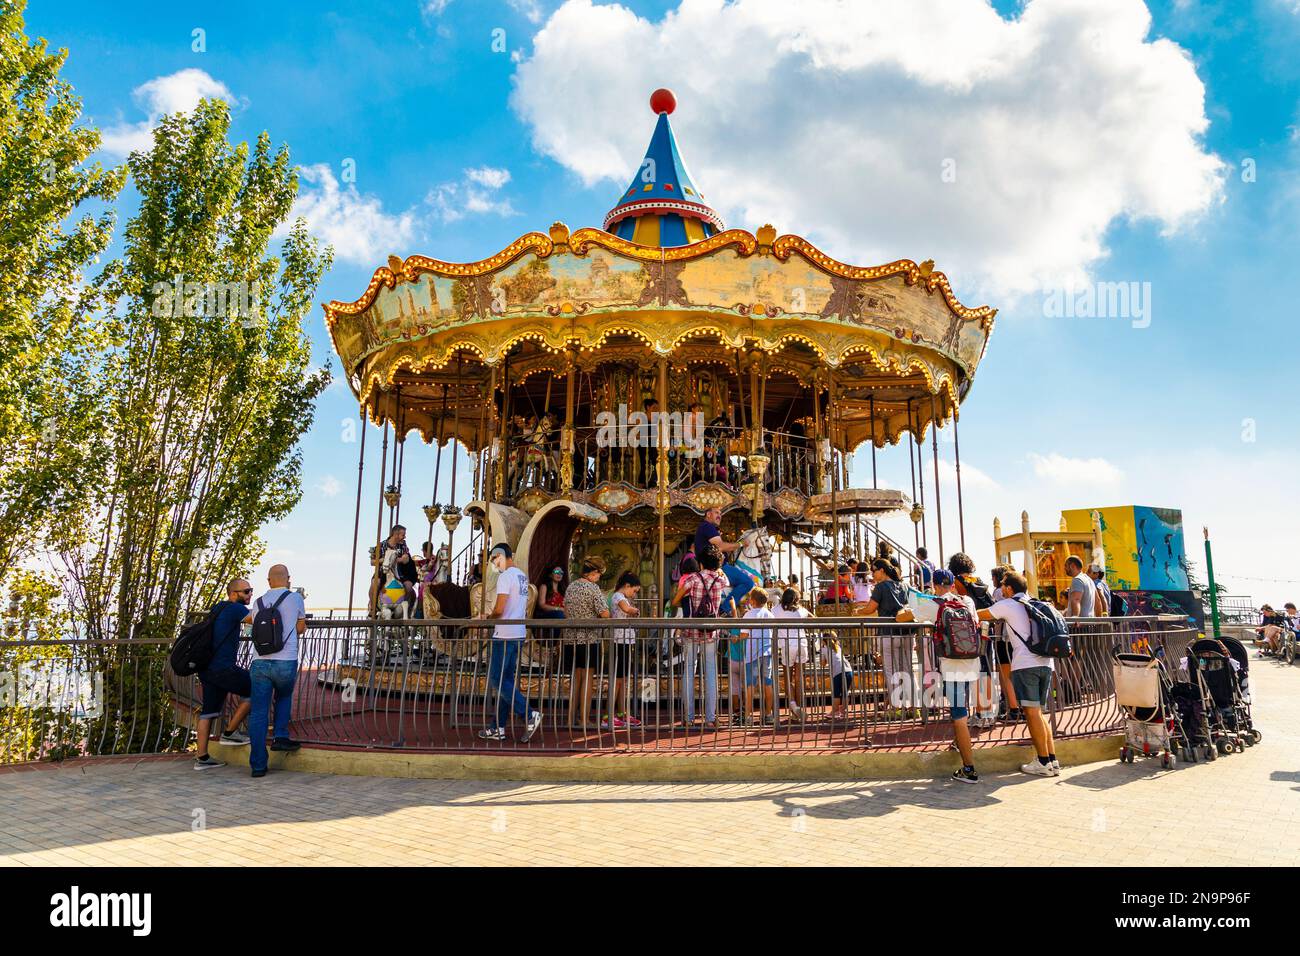 One of the oldest still operating vintage carousels at Tibidabo Amusement Park, Barcelona, Spai Stock Photo